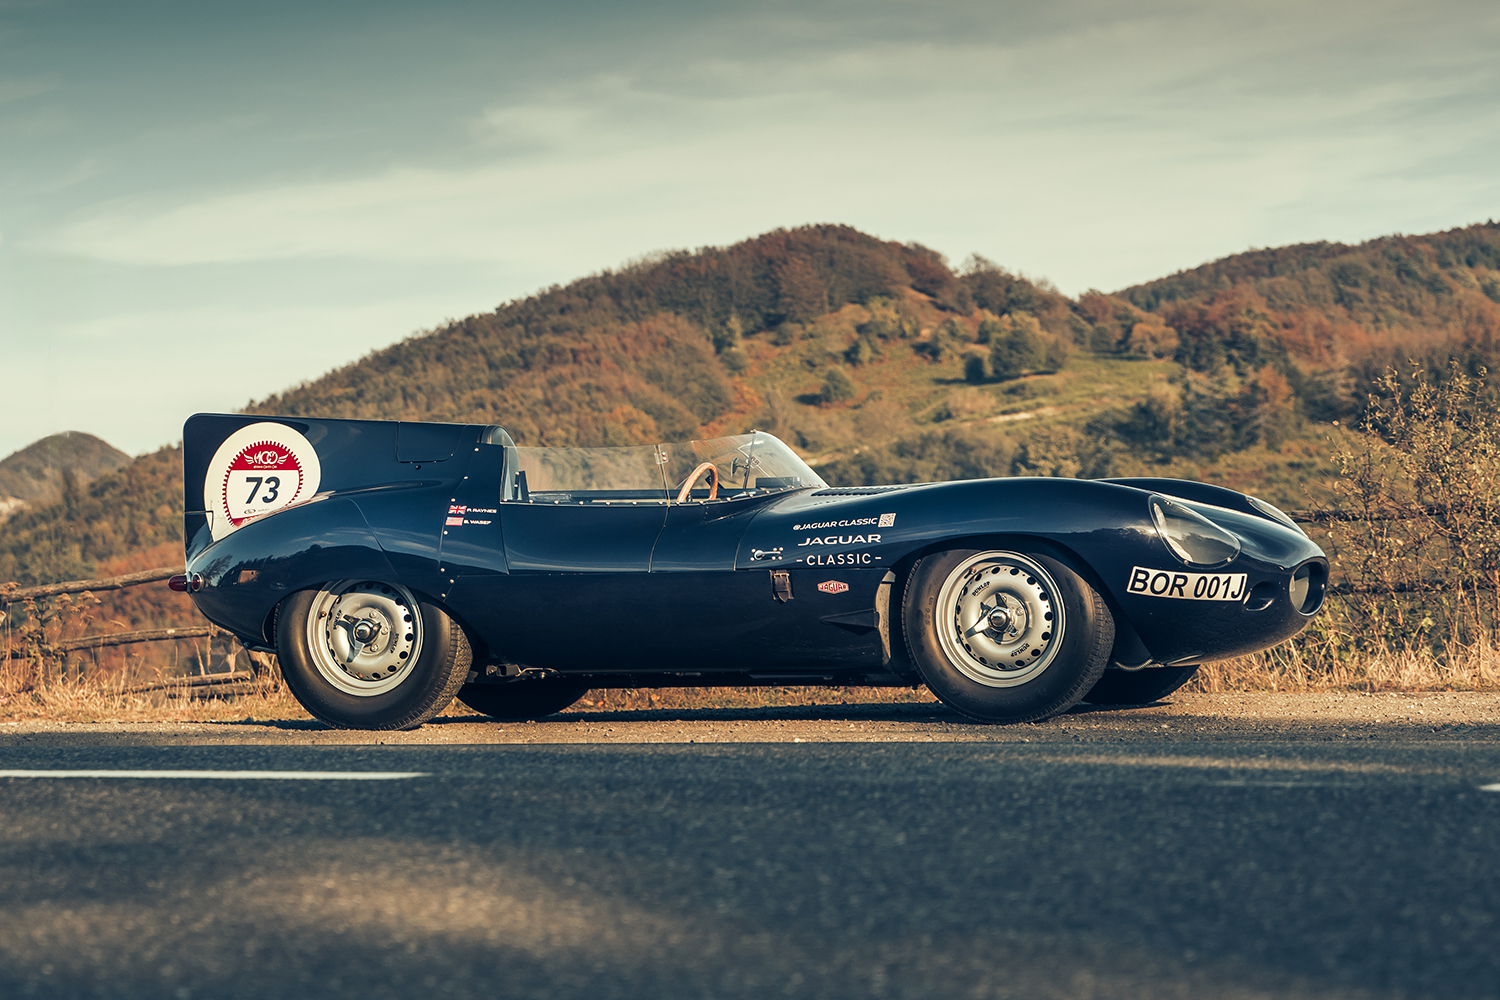 A Jaguar Classic D-type Continuation sitting on a road in rural Italy